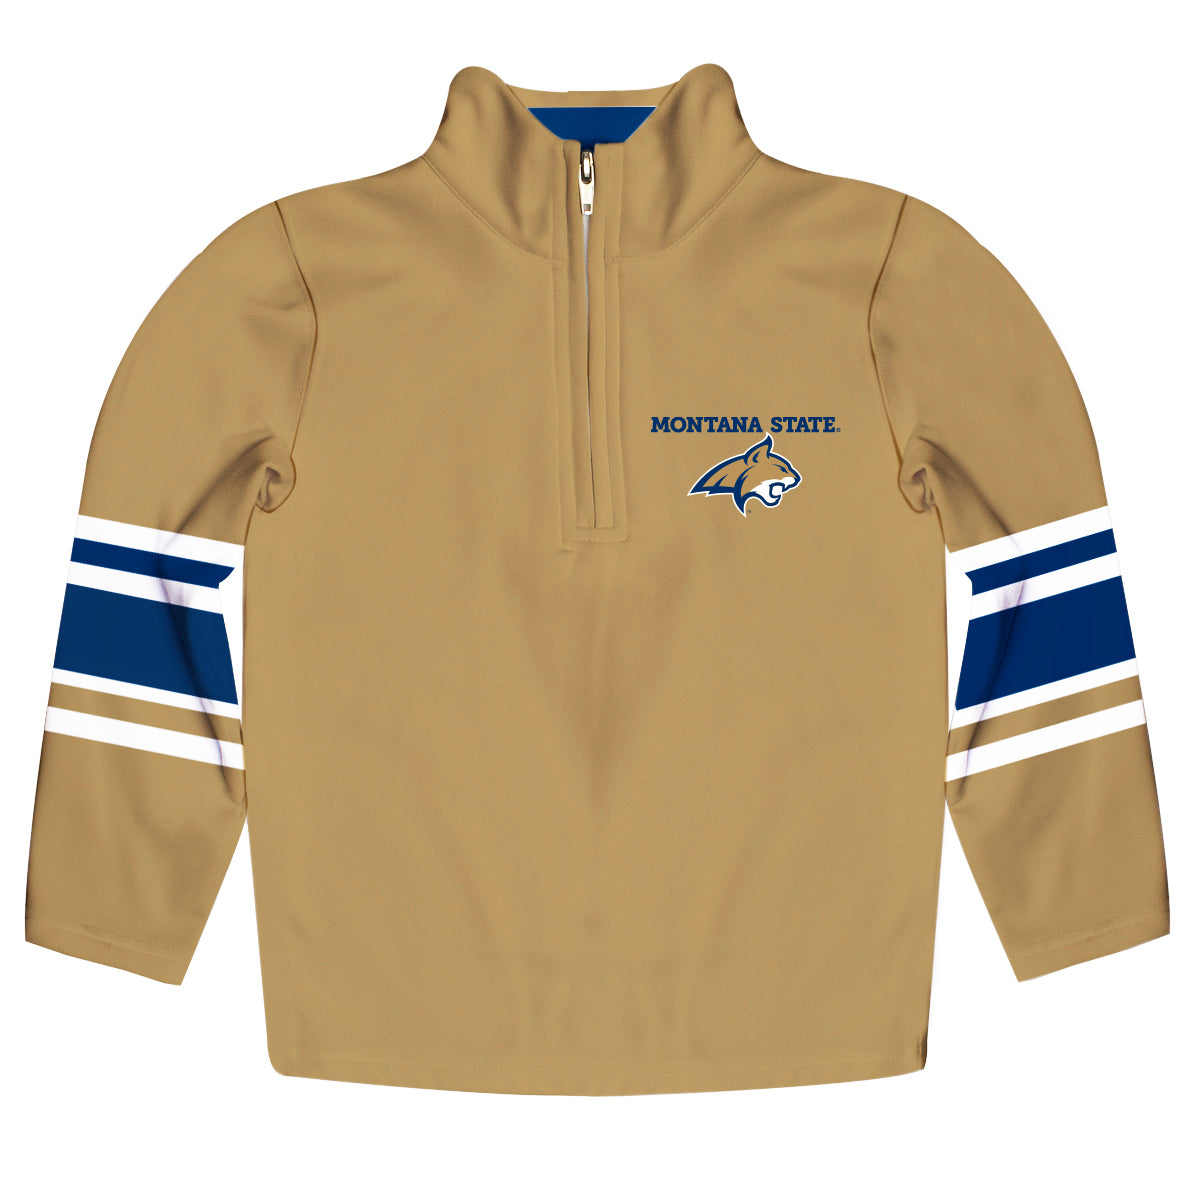 Montana State Bobcats Game Day Gold Quarter Zip Pullover for Infants Toddlers by Vive La Fete